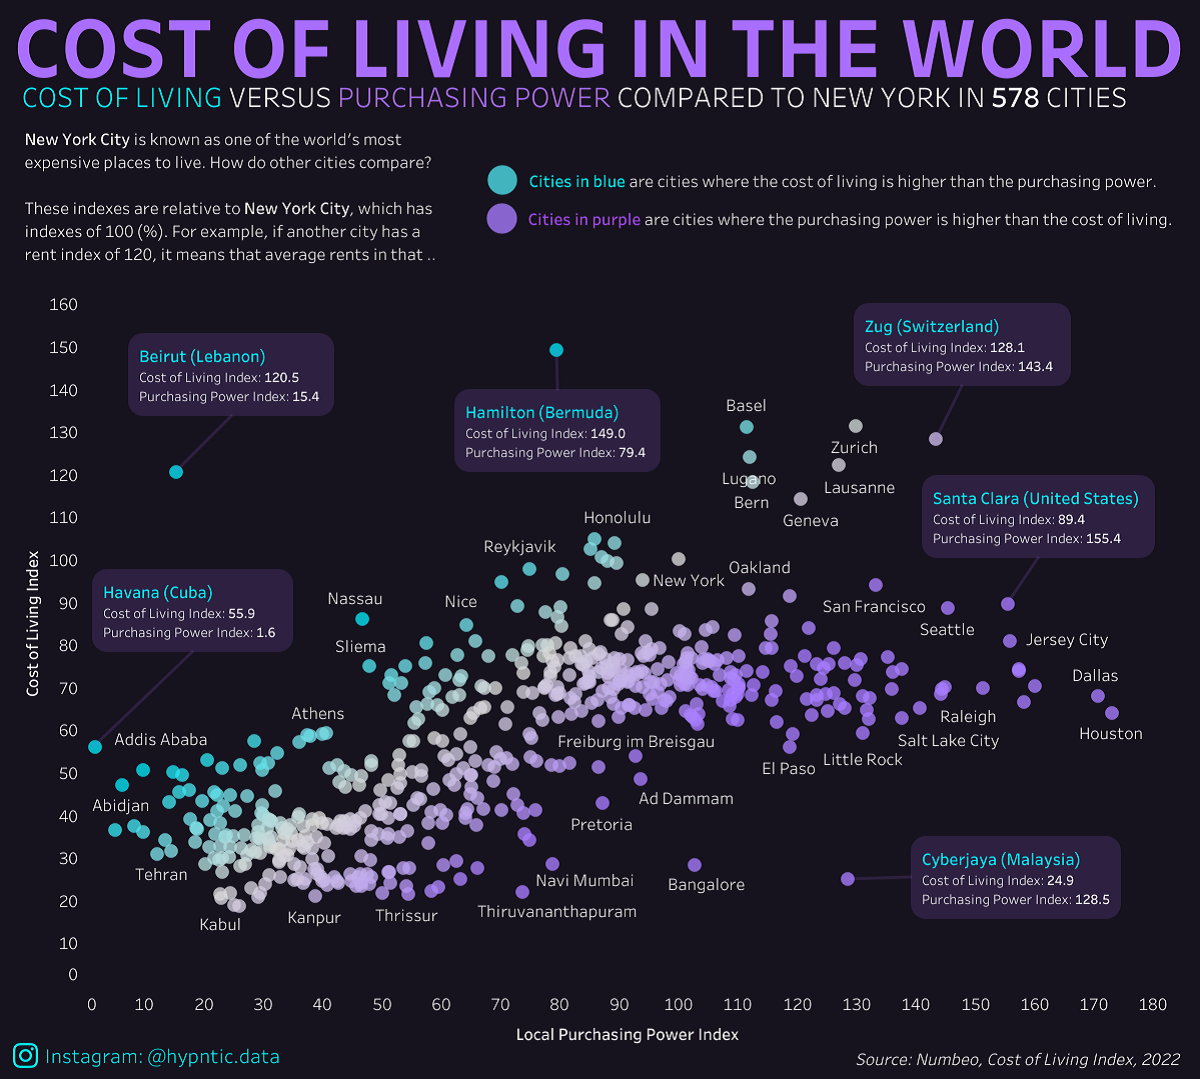 This graphic compares the cost of living and purchasing power of 578 cities worldwide, using New York City as a benchmark for comparison.